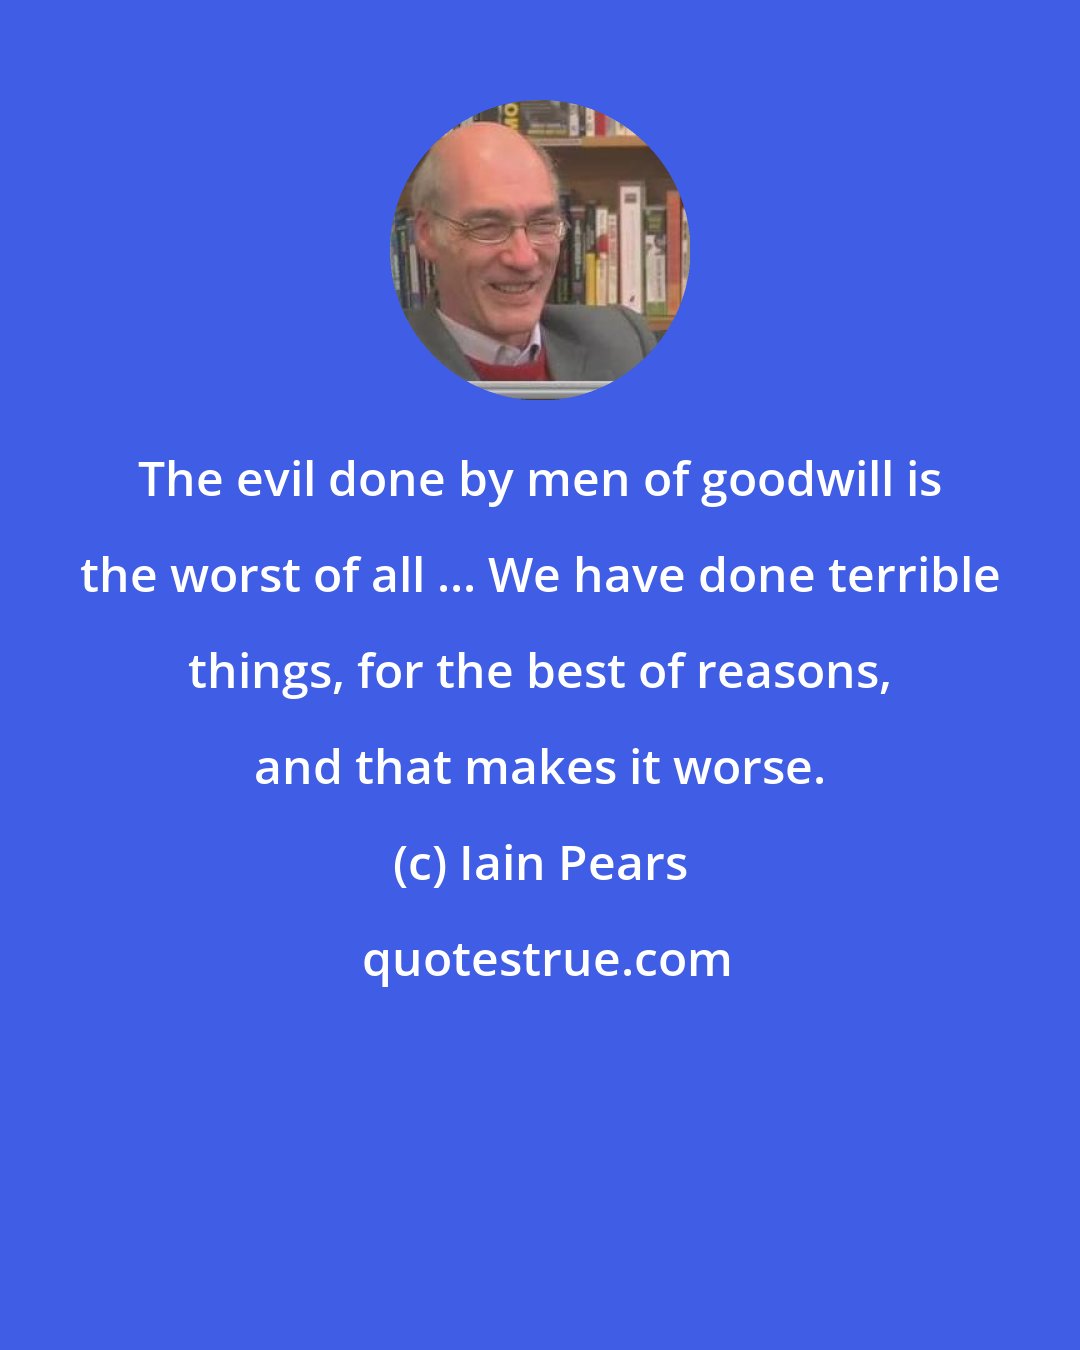 Iain Pears: The evil done by men of goodwill is the worst of all ... We have done terrible things, for the best of reasons, and that makes it worse.